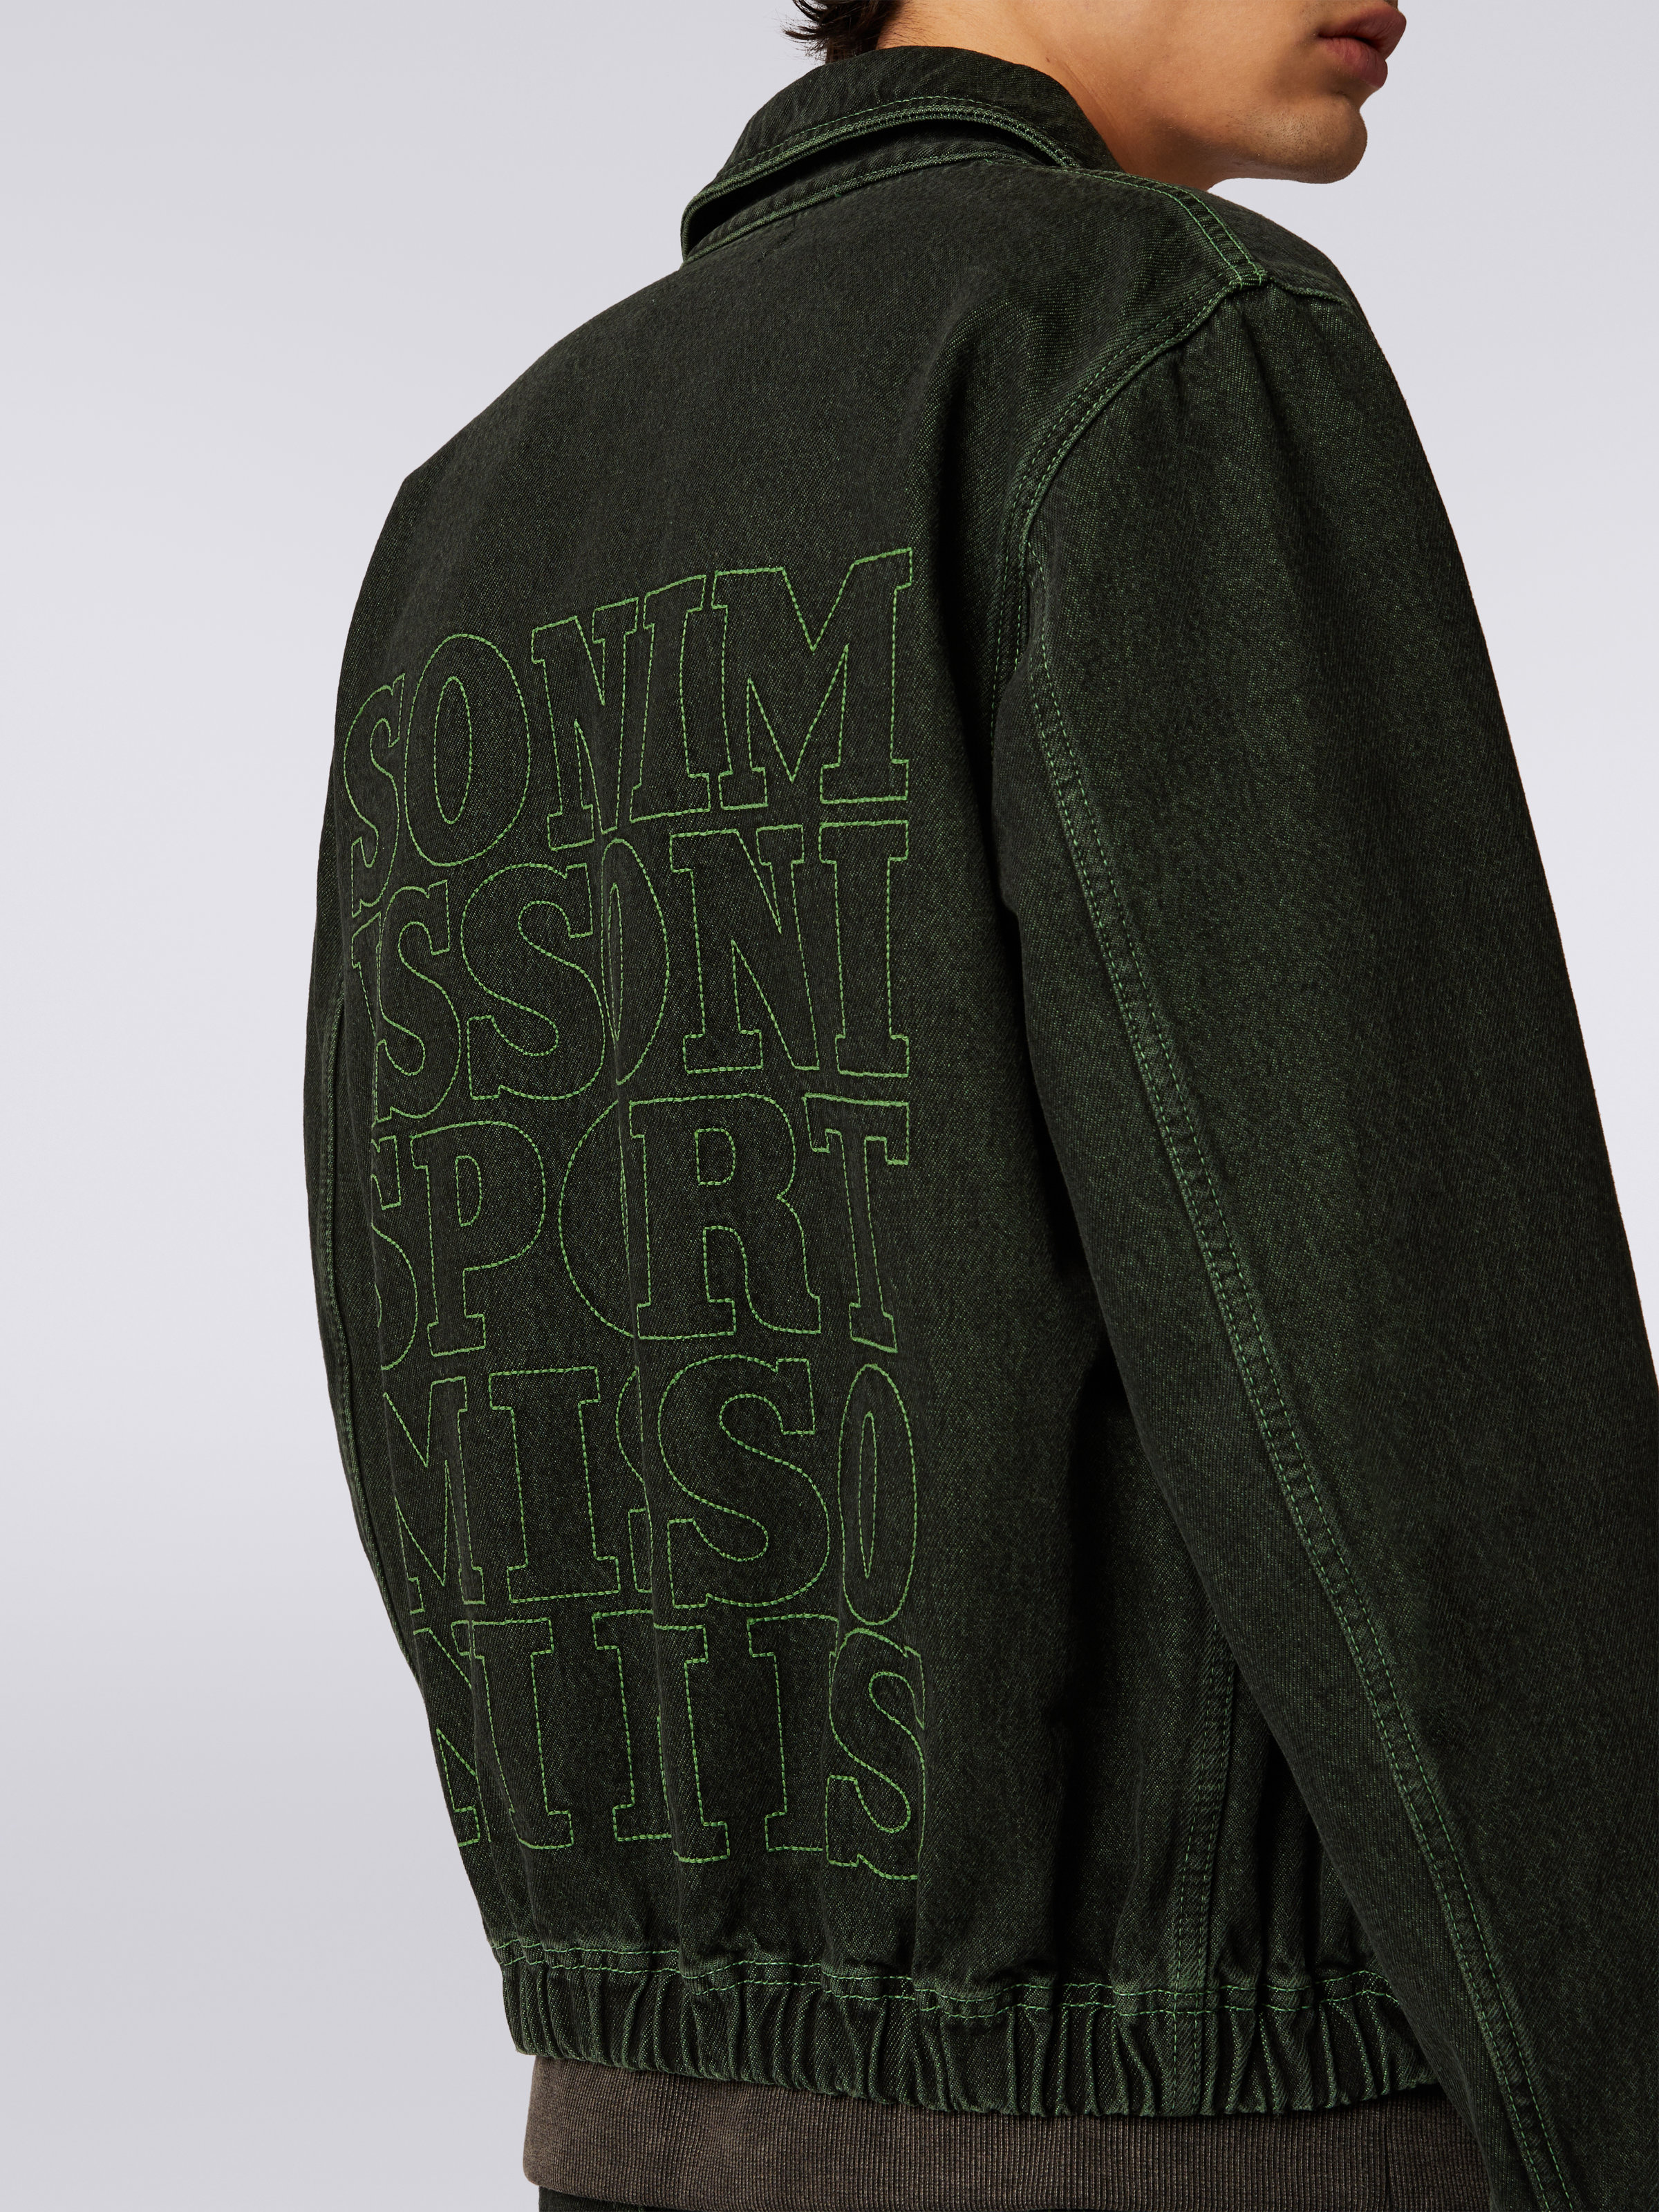 Denim jacket with embroidered logo, Green - 4